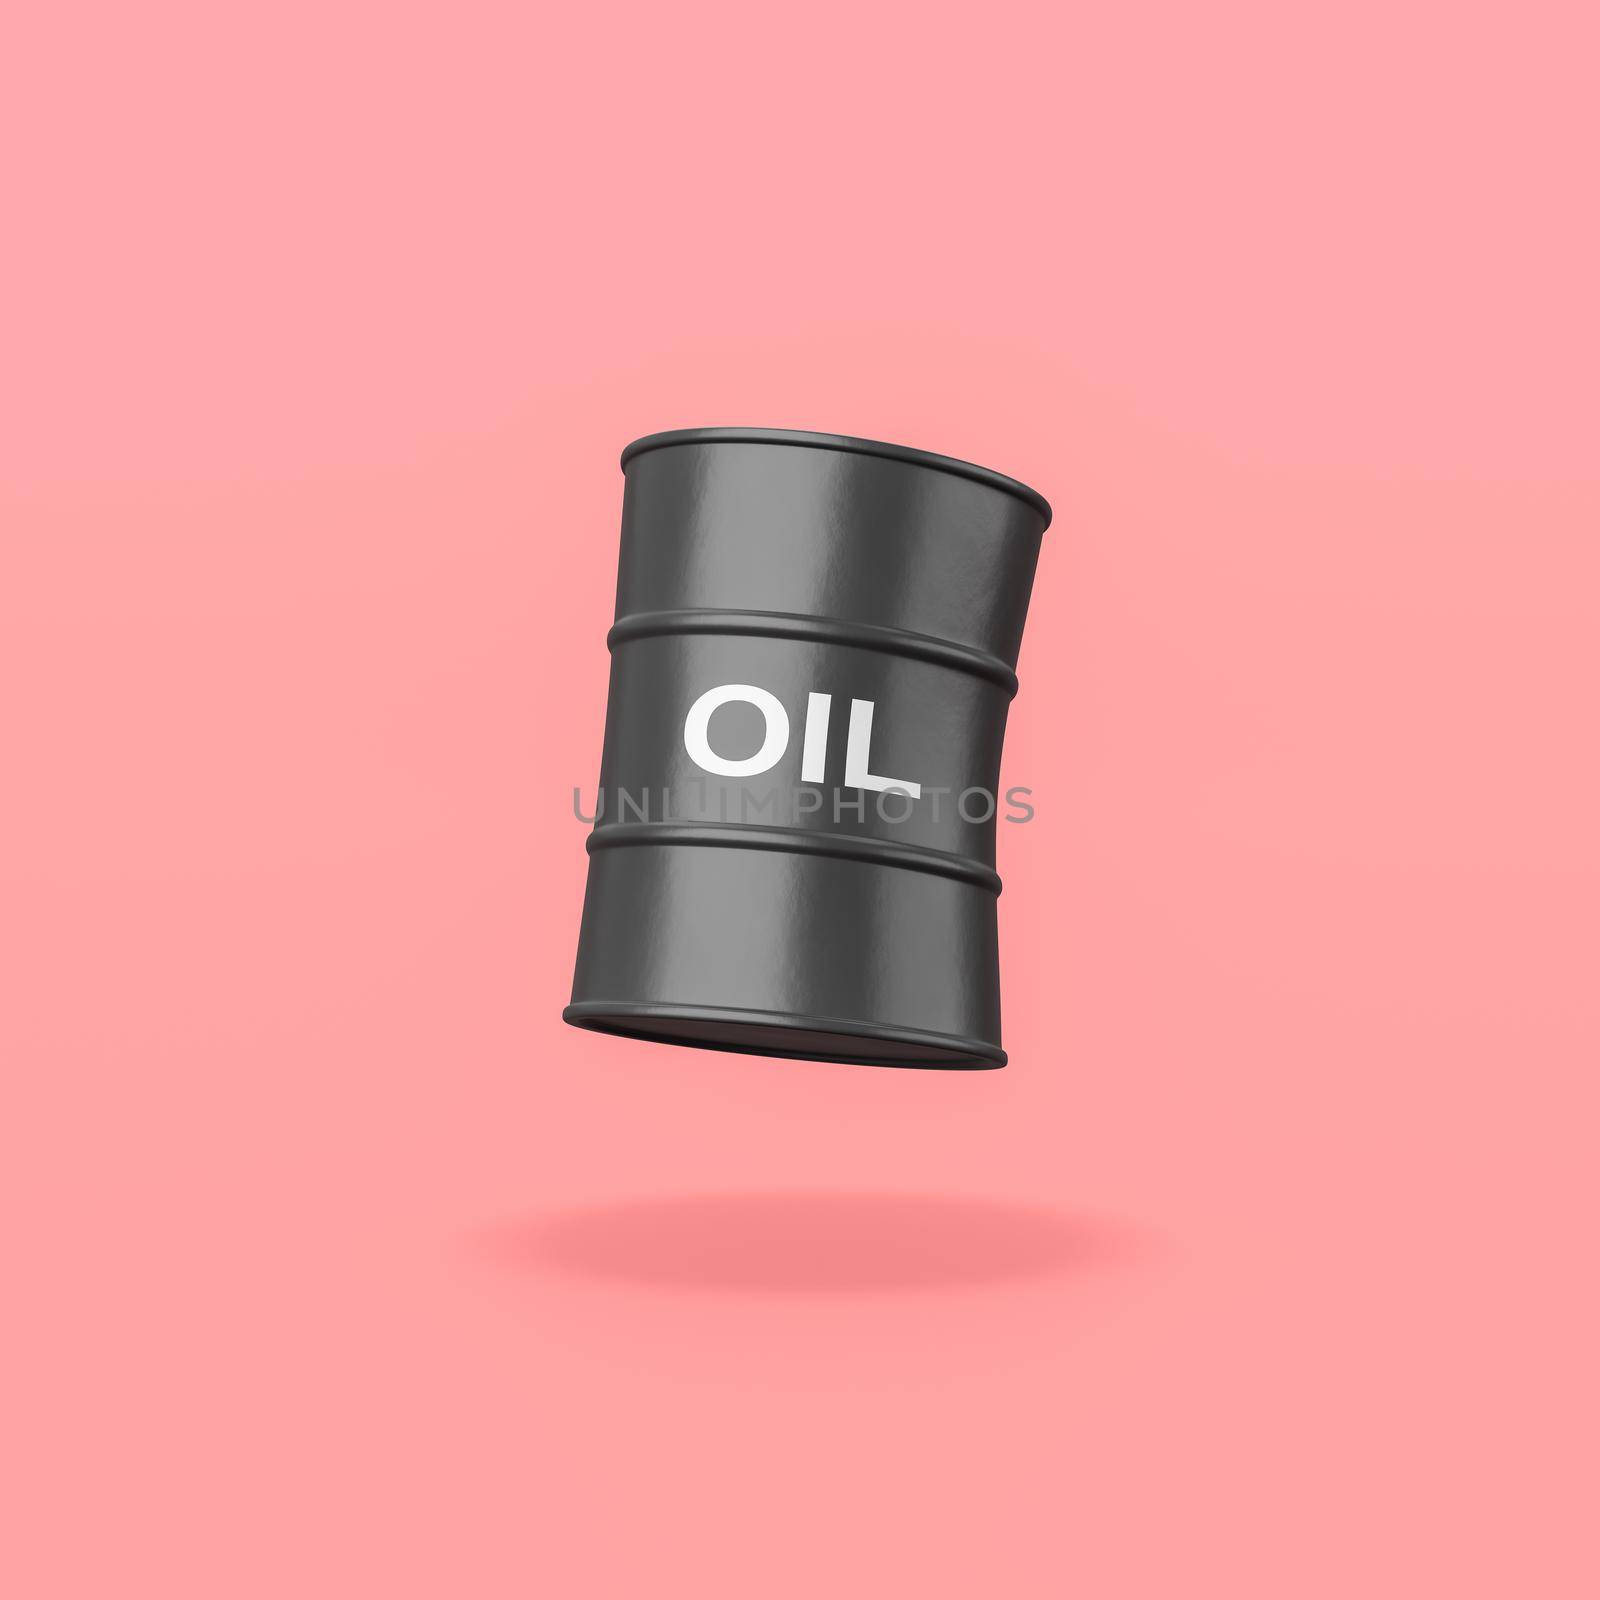 Oil Barrel on Red Background by make